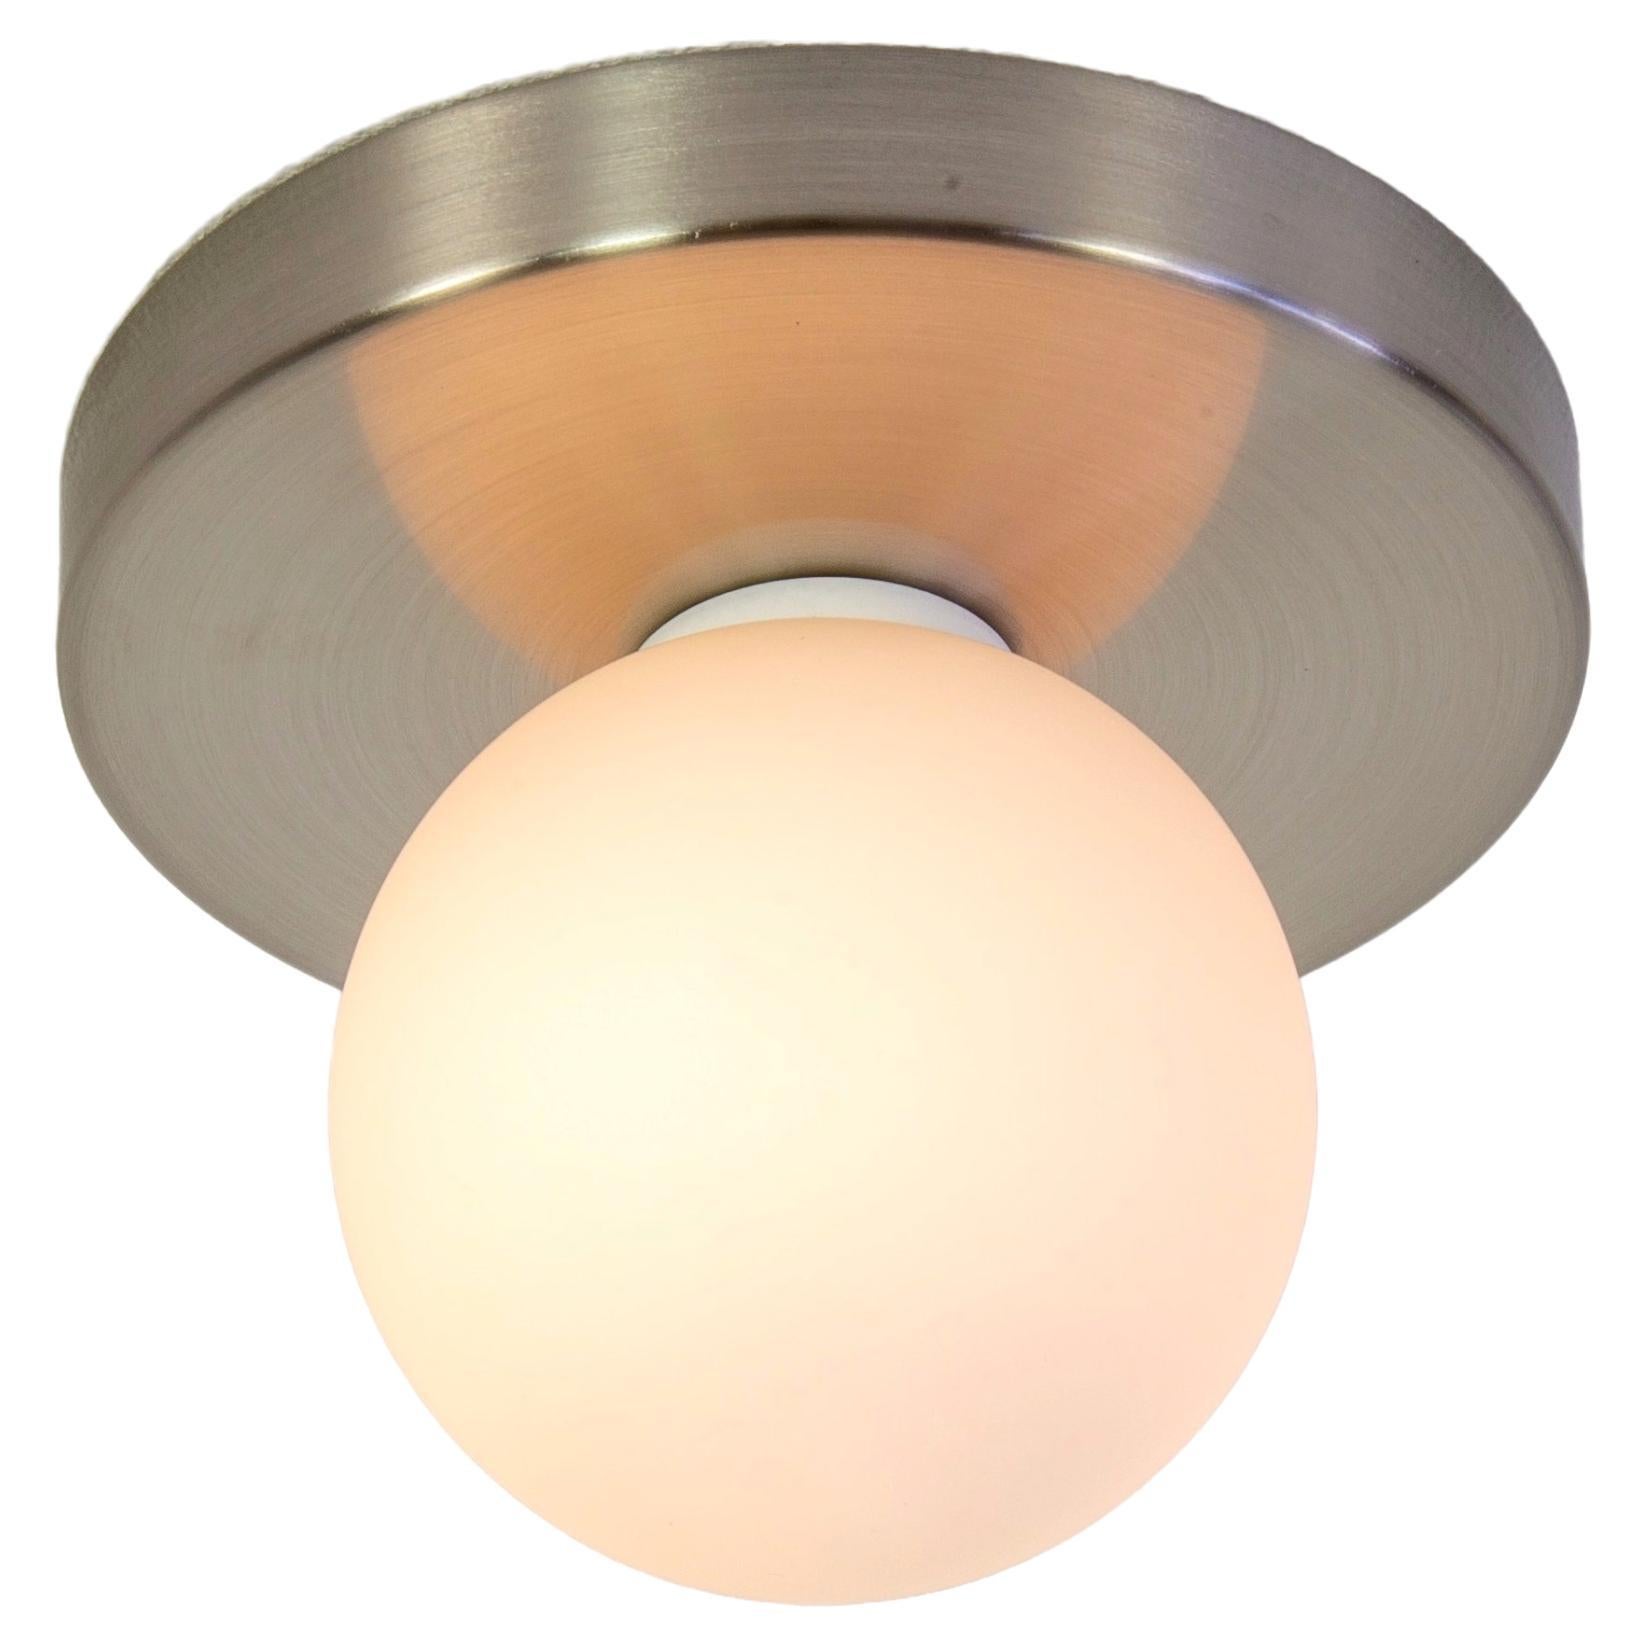 Globe Flush Mount by Research.Lighting, Brushed Nickel, Made to Order